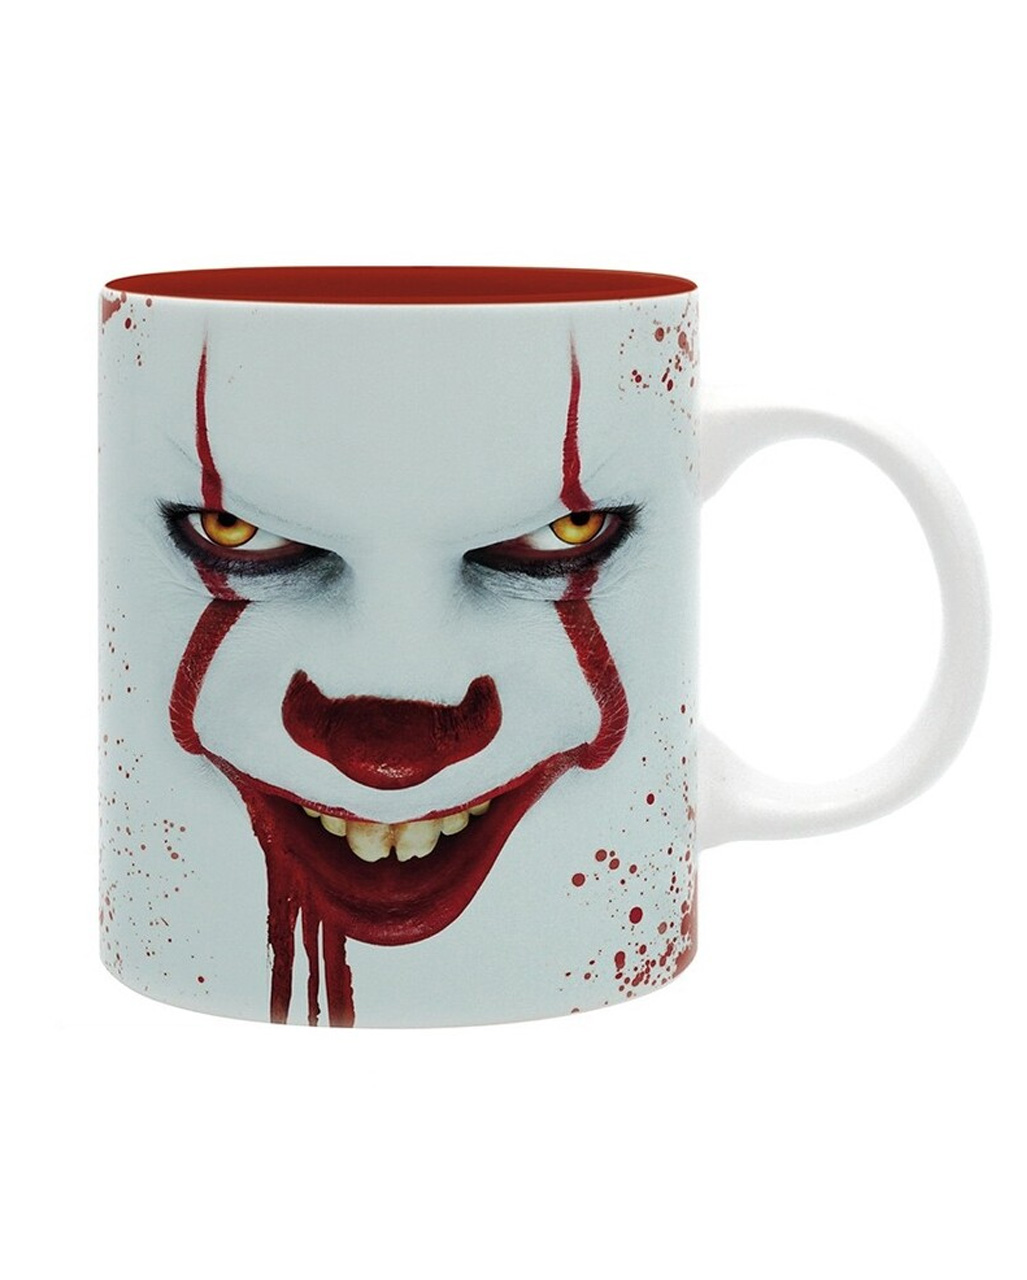 IT PENNYWISE SHUSH STEPHEN KING CLOWN MUG NEW GIFT BOXED 100% OFFICIAL MERCH 